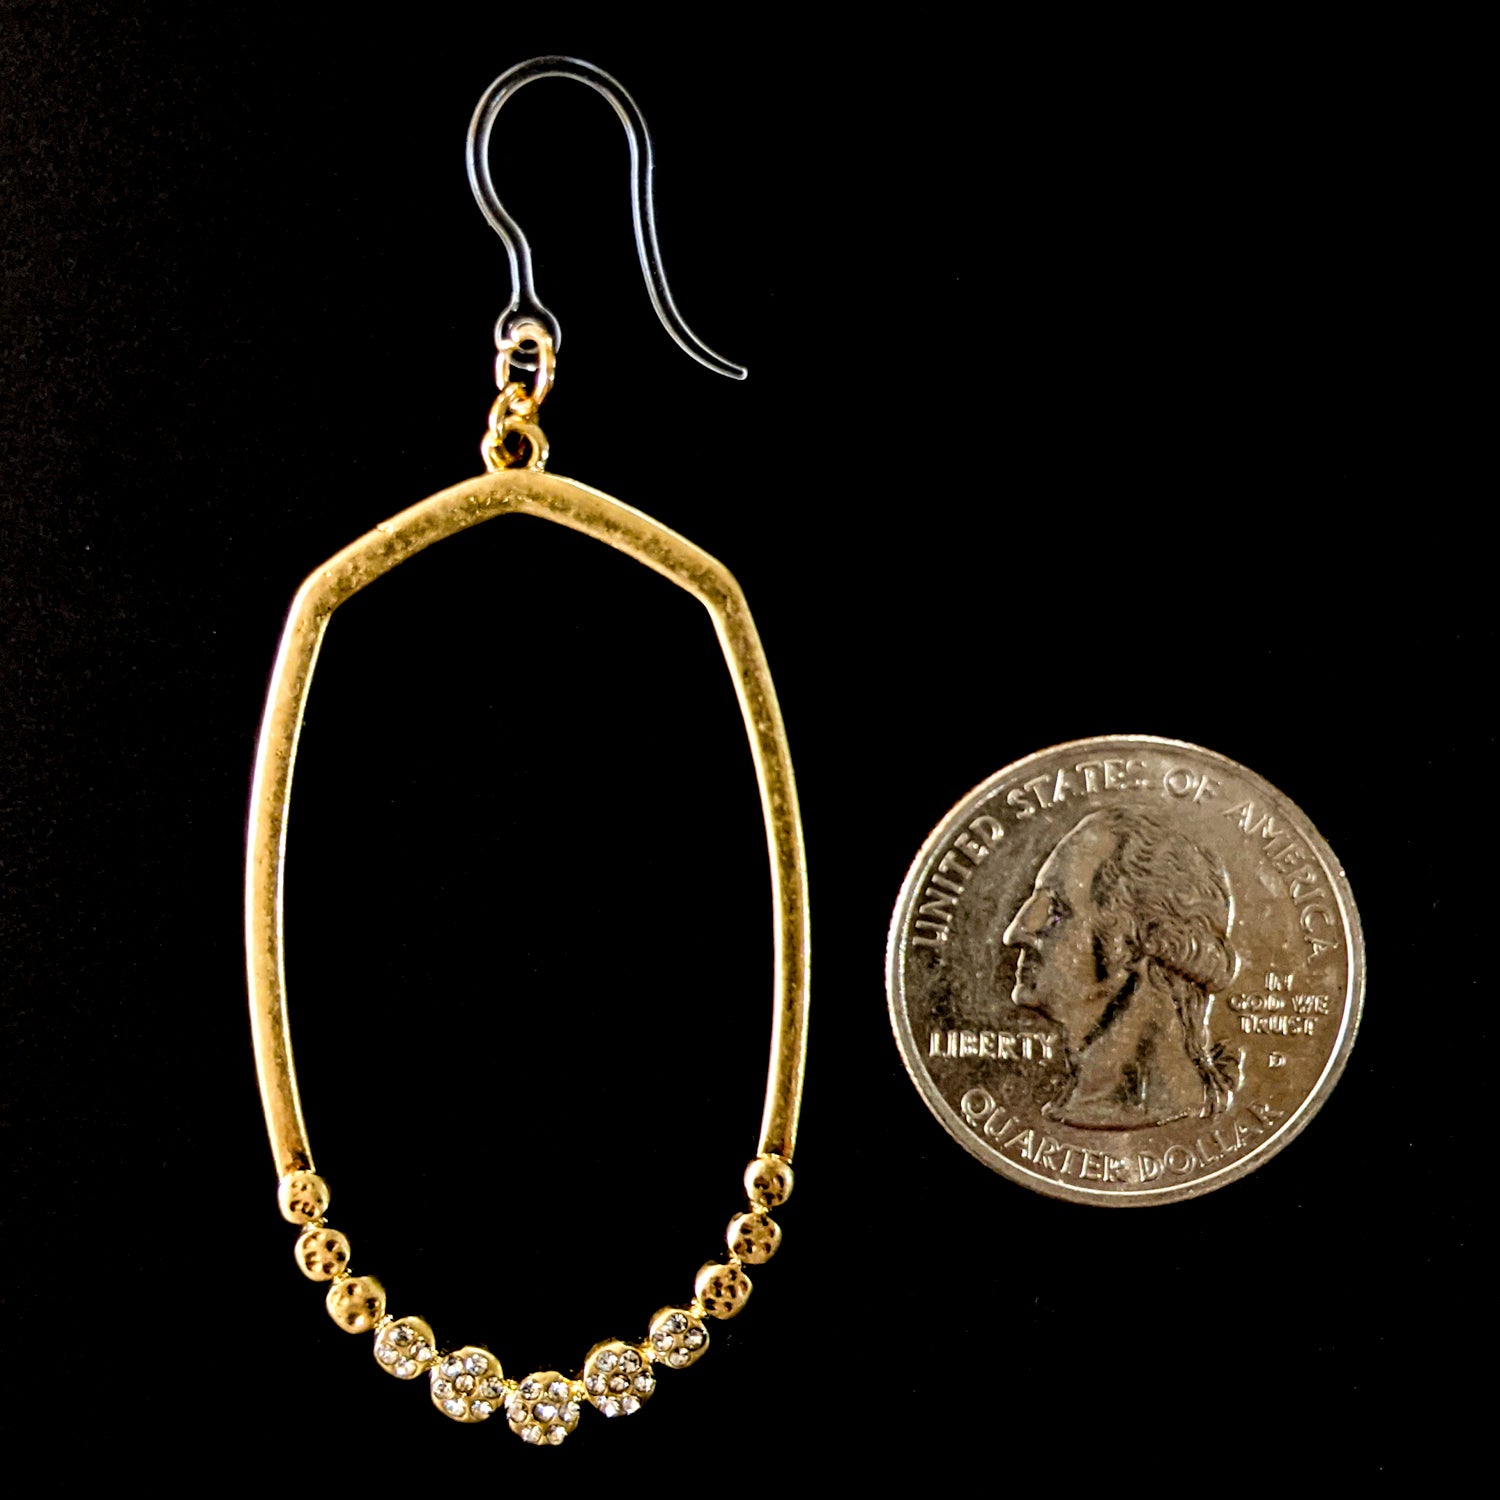 Gold Necklace Earrings (Dangles) - rounded - size comparison quarter